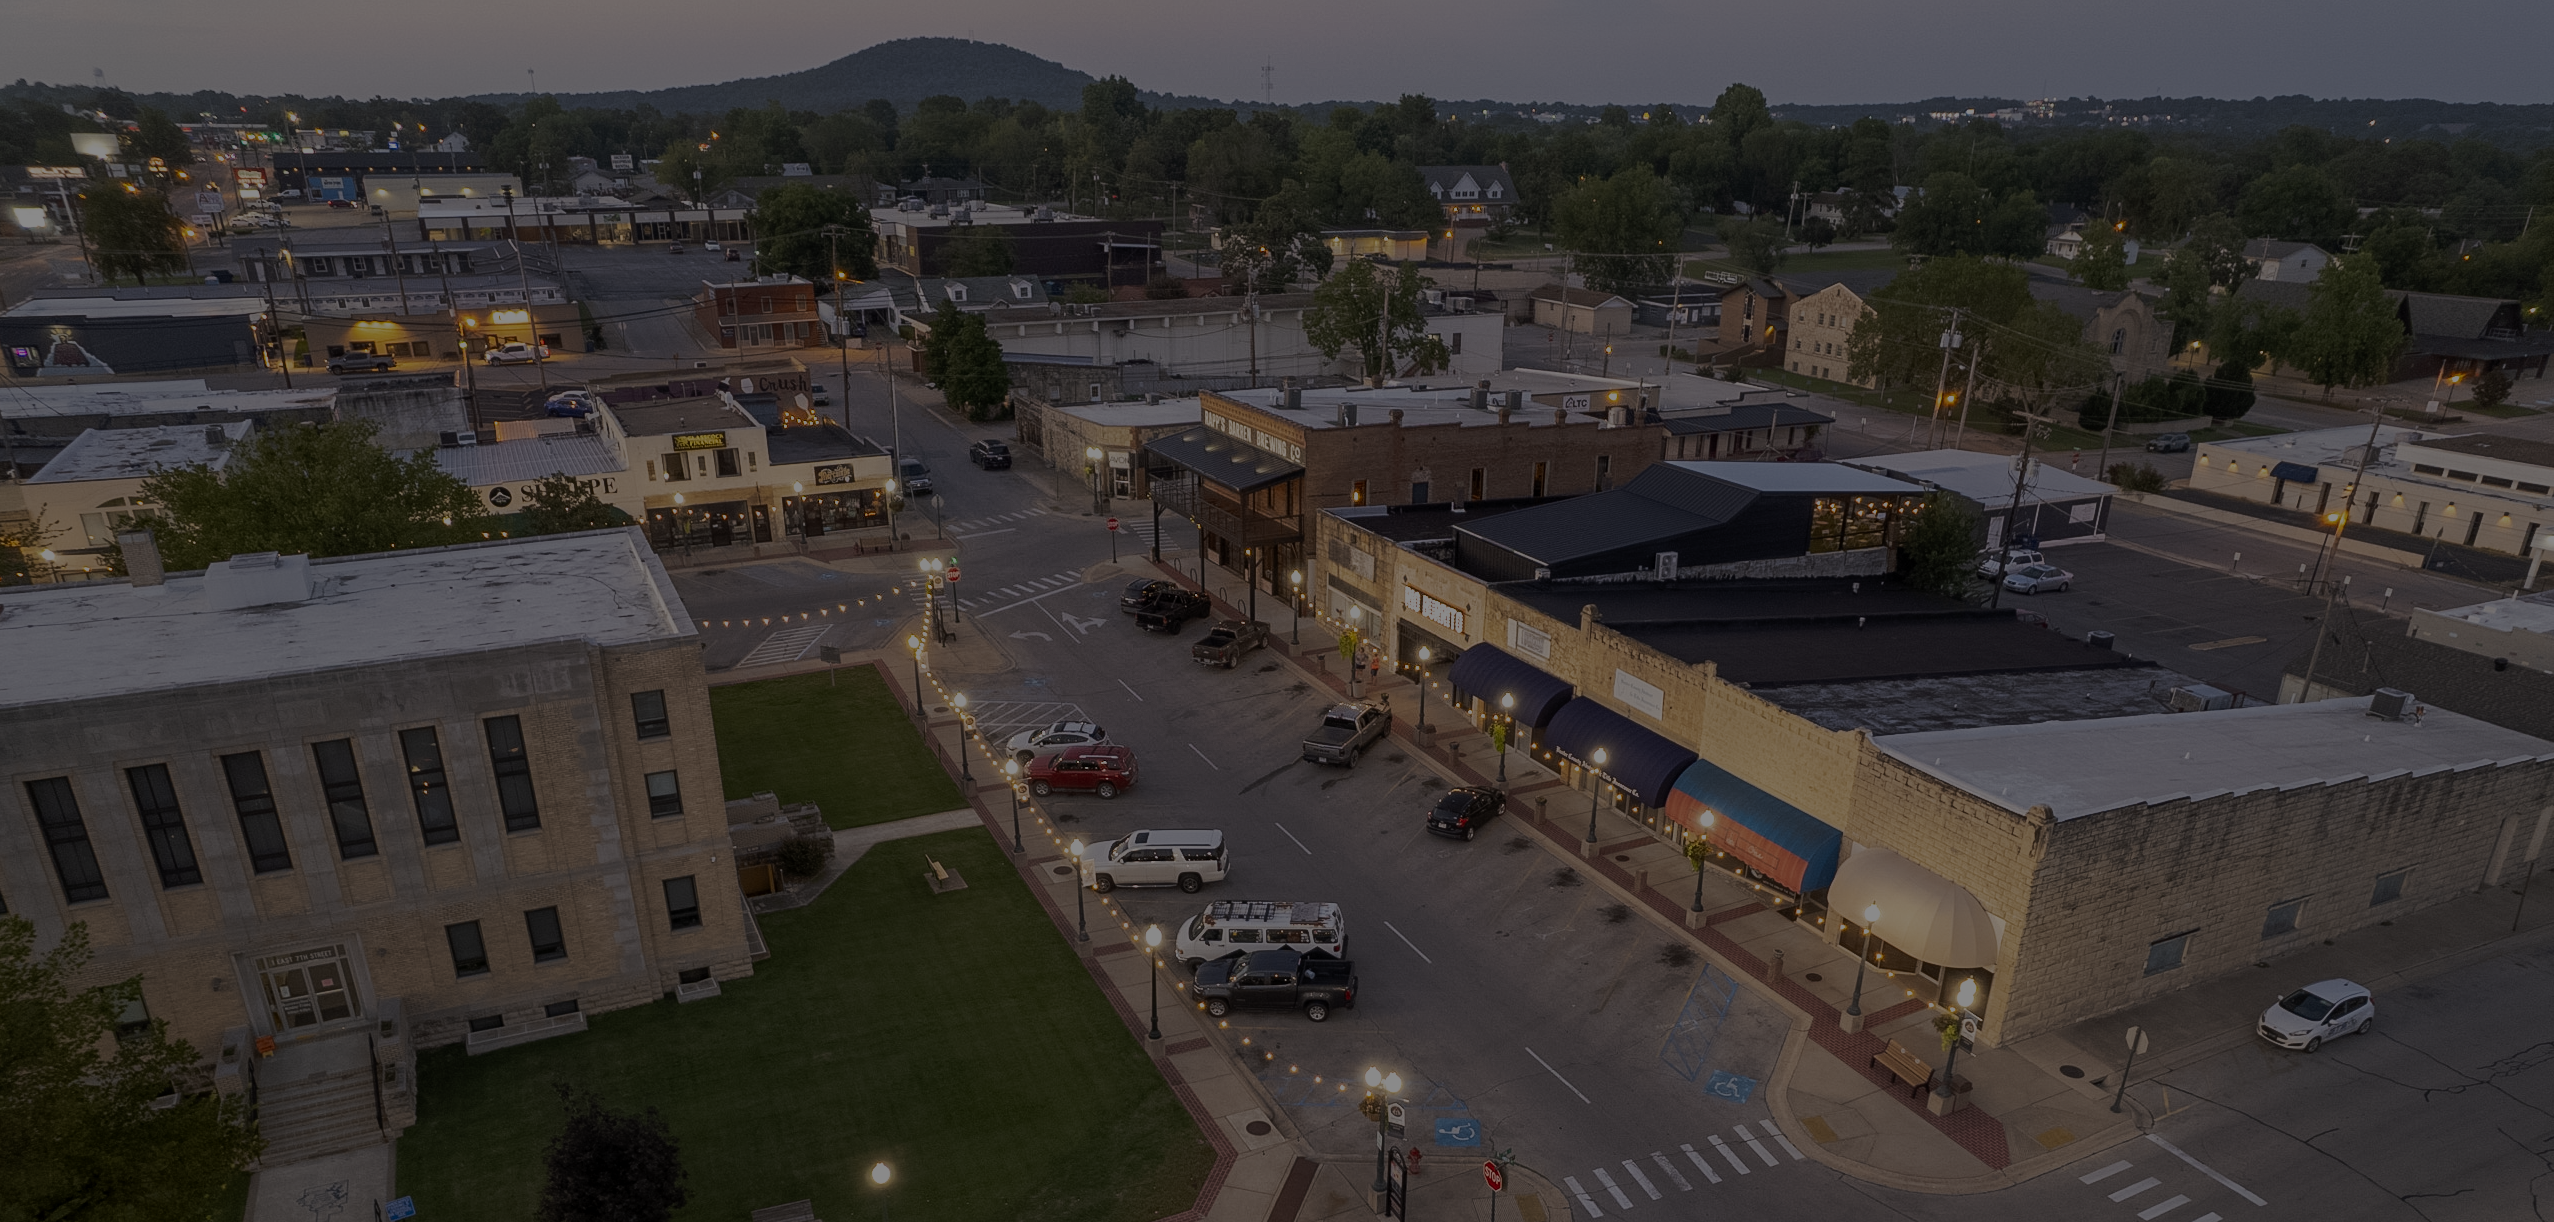 Aerial view of Baker District in Mountain Home Arkansas, darkened for a website header image